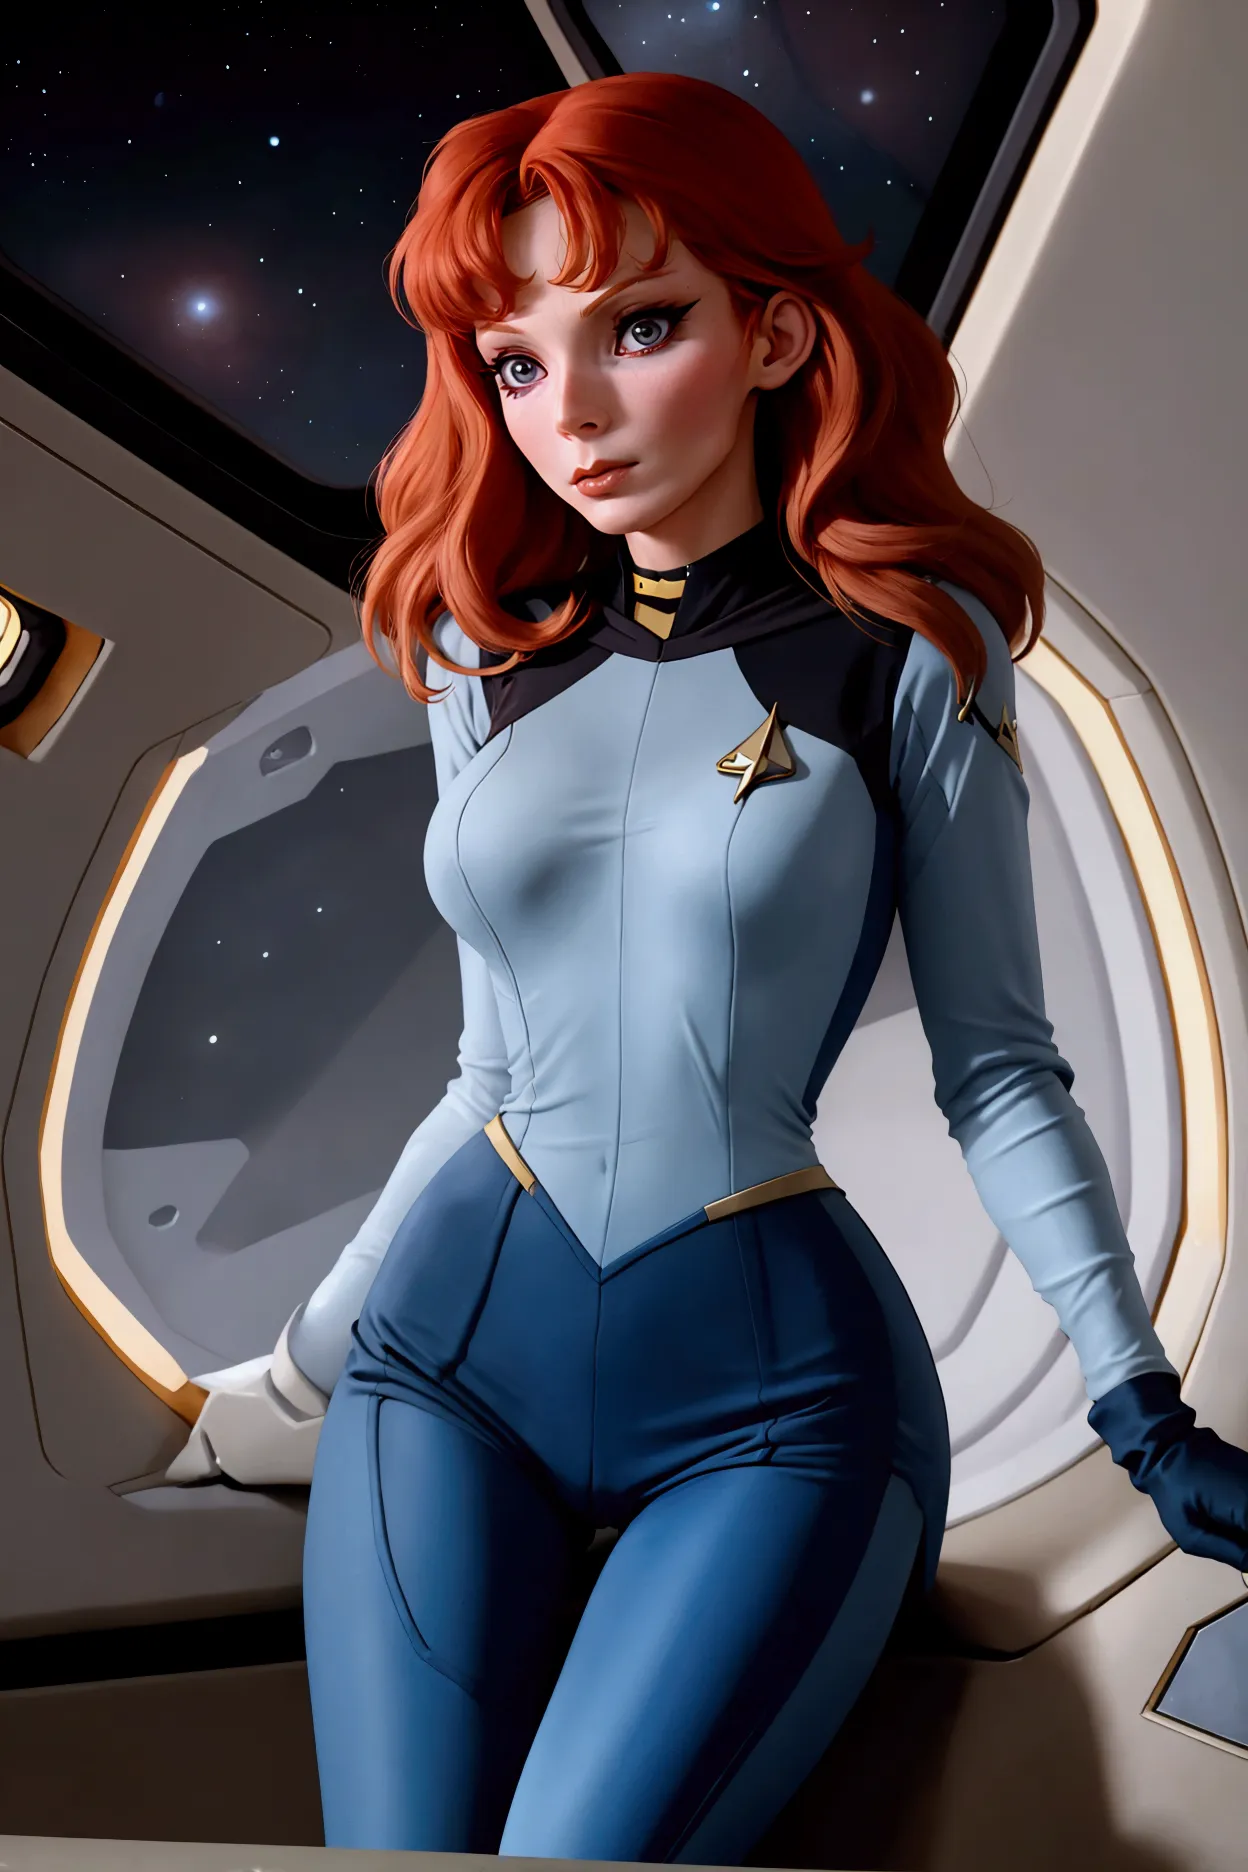 (Beverly Crusher, age 25, sexy revealing star fleet uniform) being a sexy smoldering hot seductress as she goes about her duties...